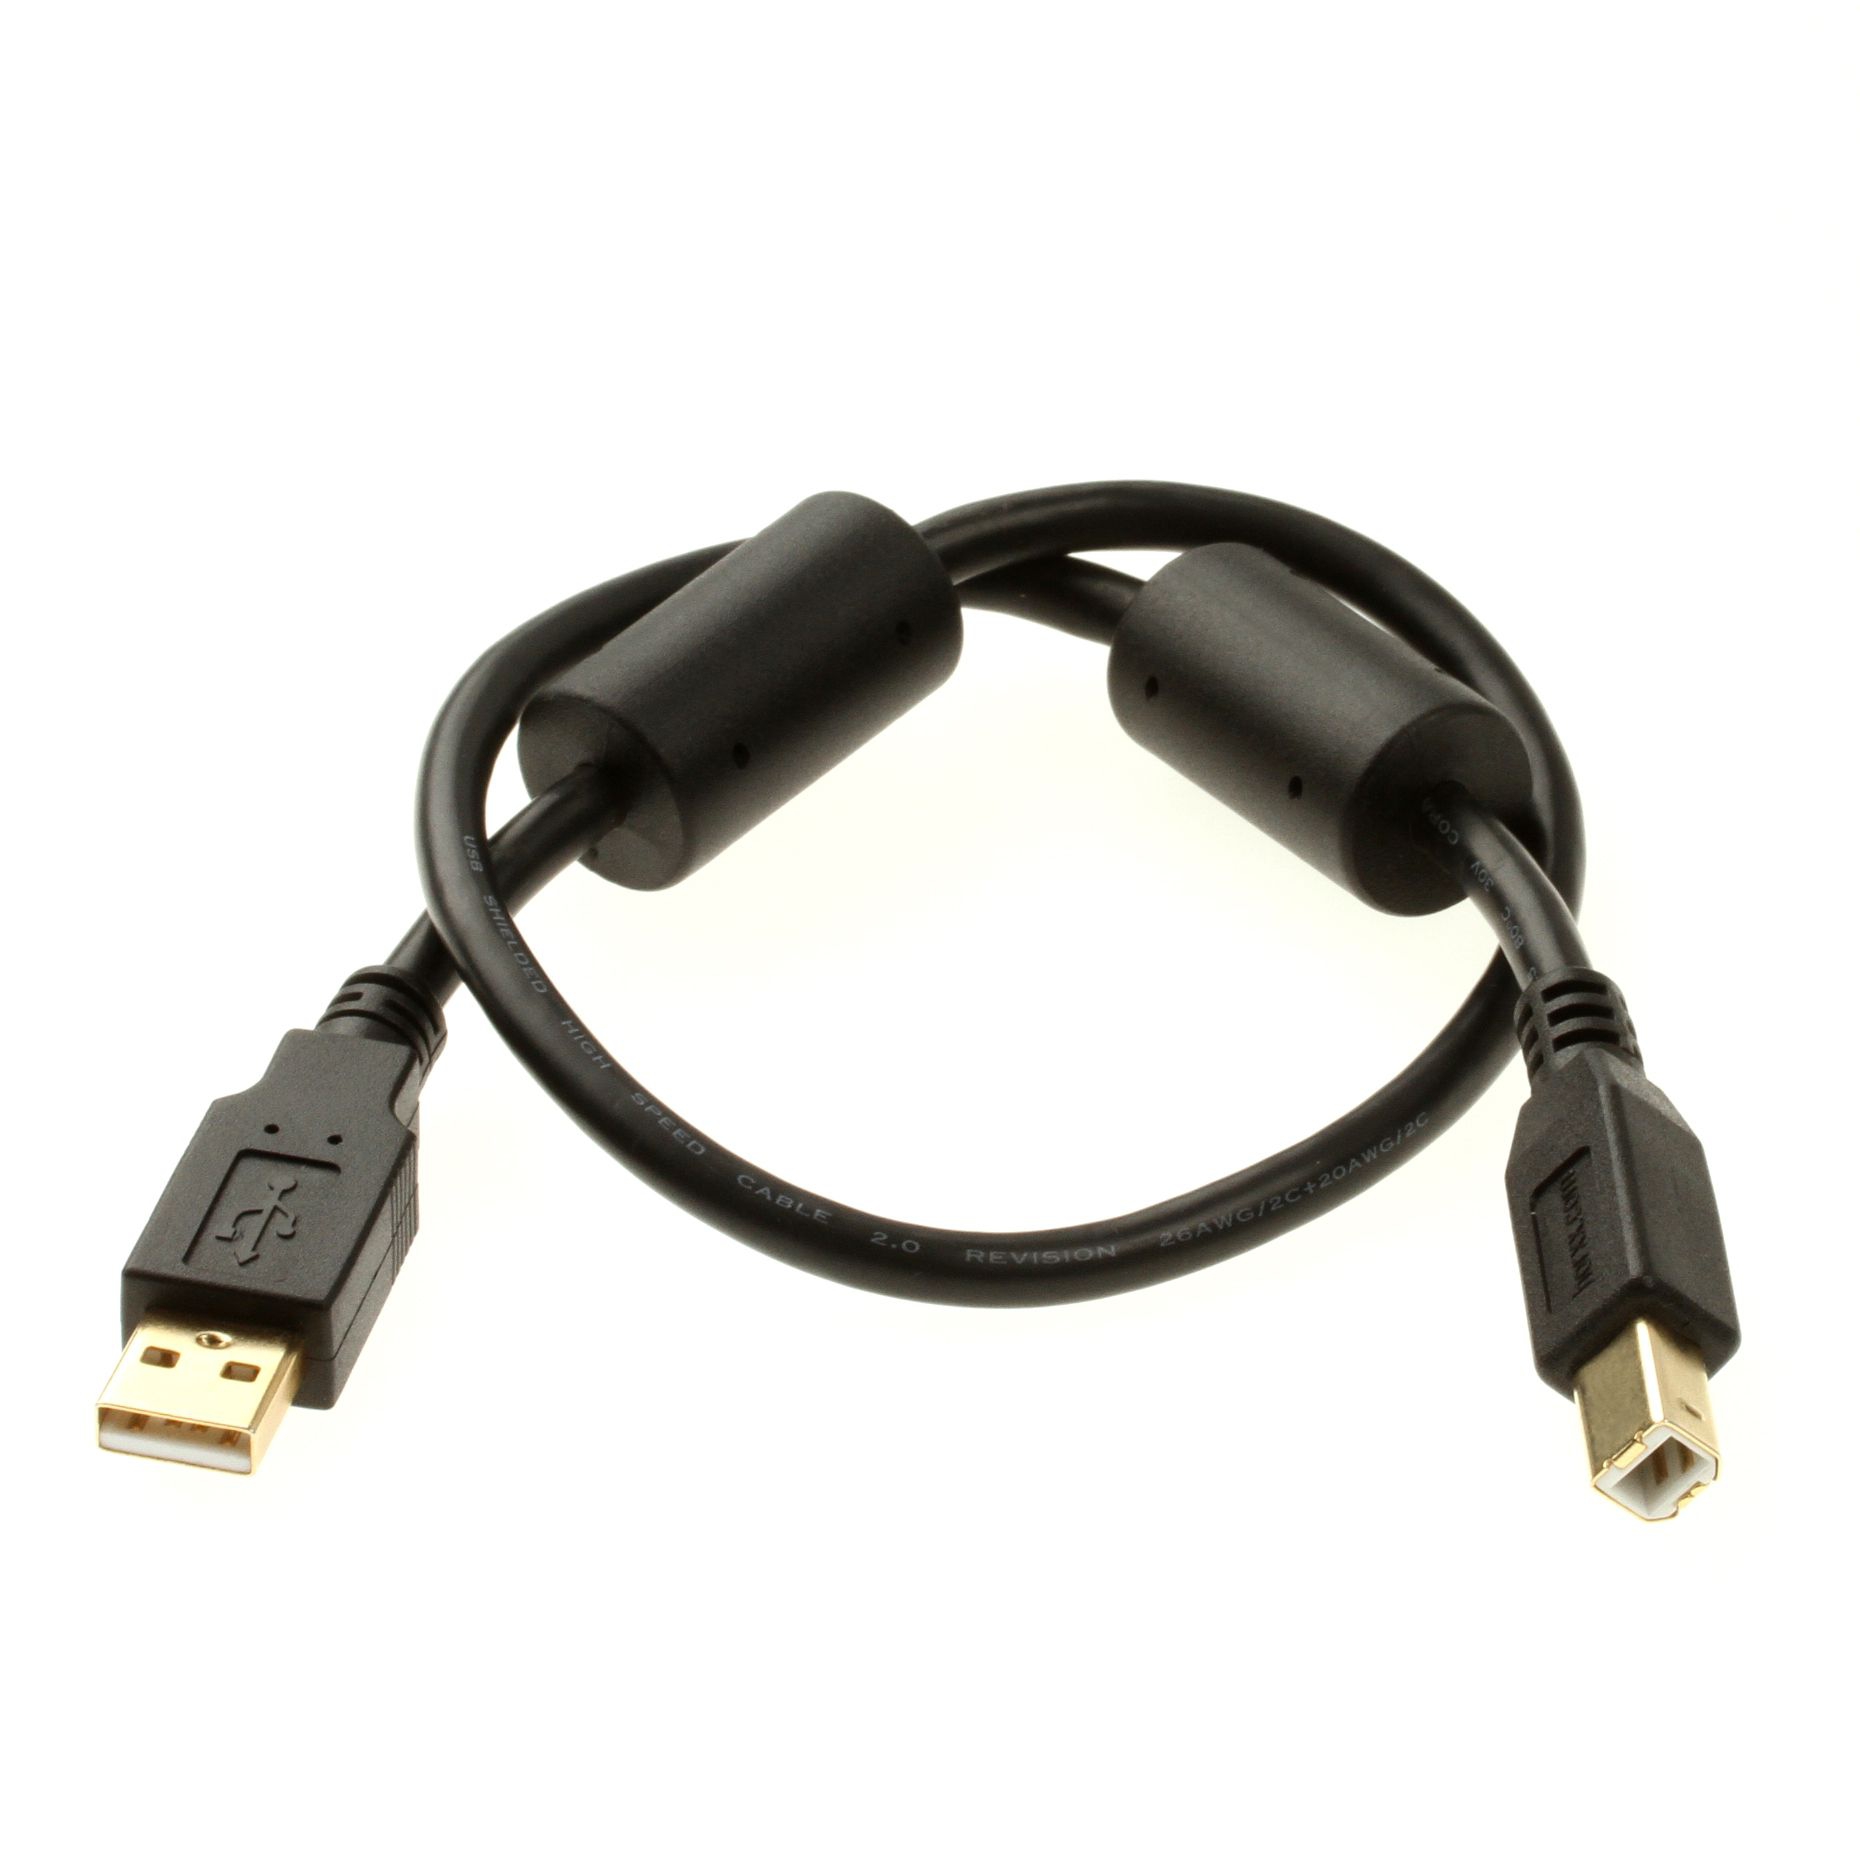 USB 2.0 cable with 2 ferrite cores INDUSTRIAL VERSION 30cm